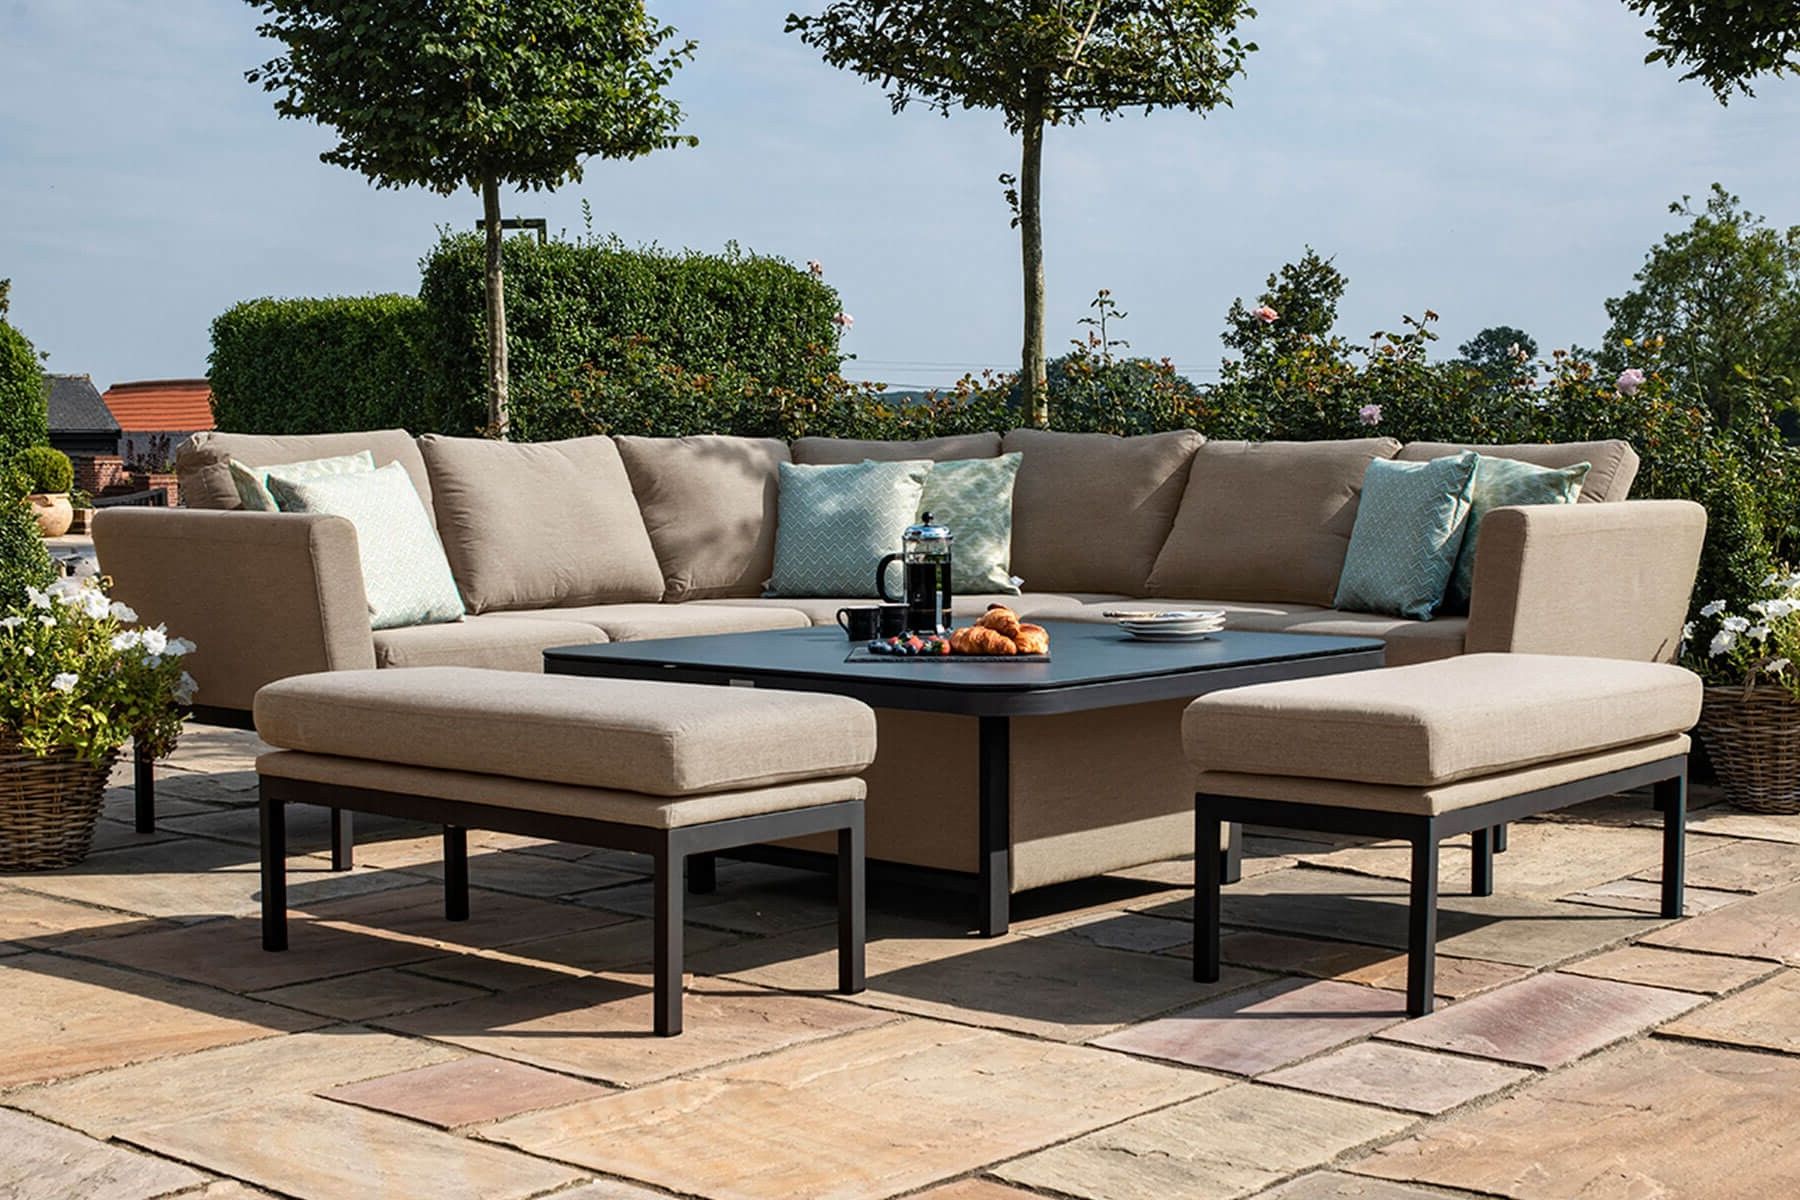 Newest Deluxe Square Patio Dining Sets Pertaining To Maze Outdoor Fabric Pulse Deluxe Square Corner Dining Set – Rising Table (View 9 of 15)